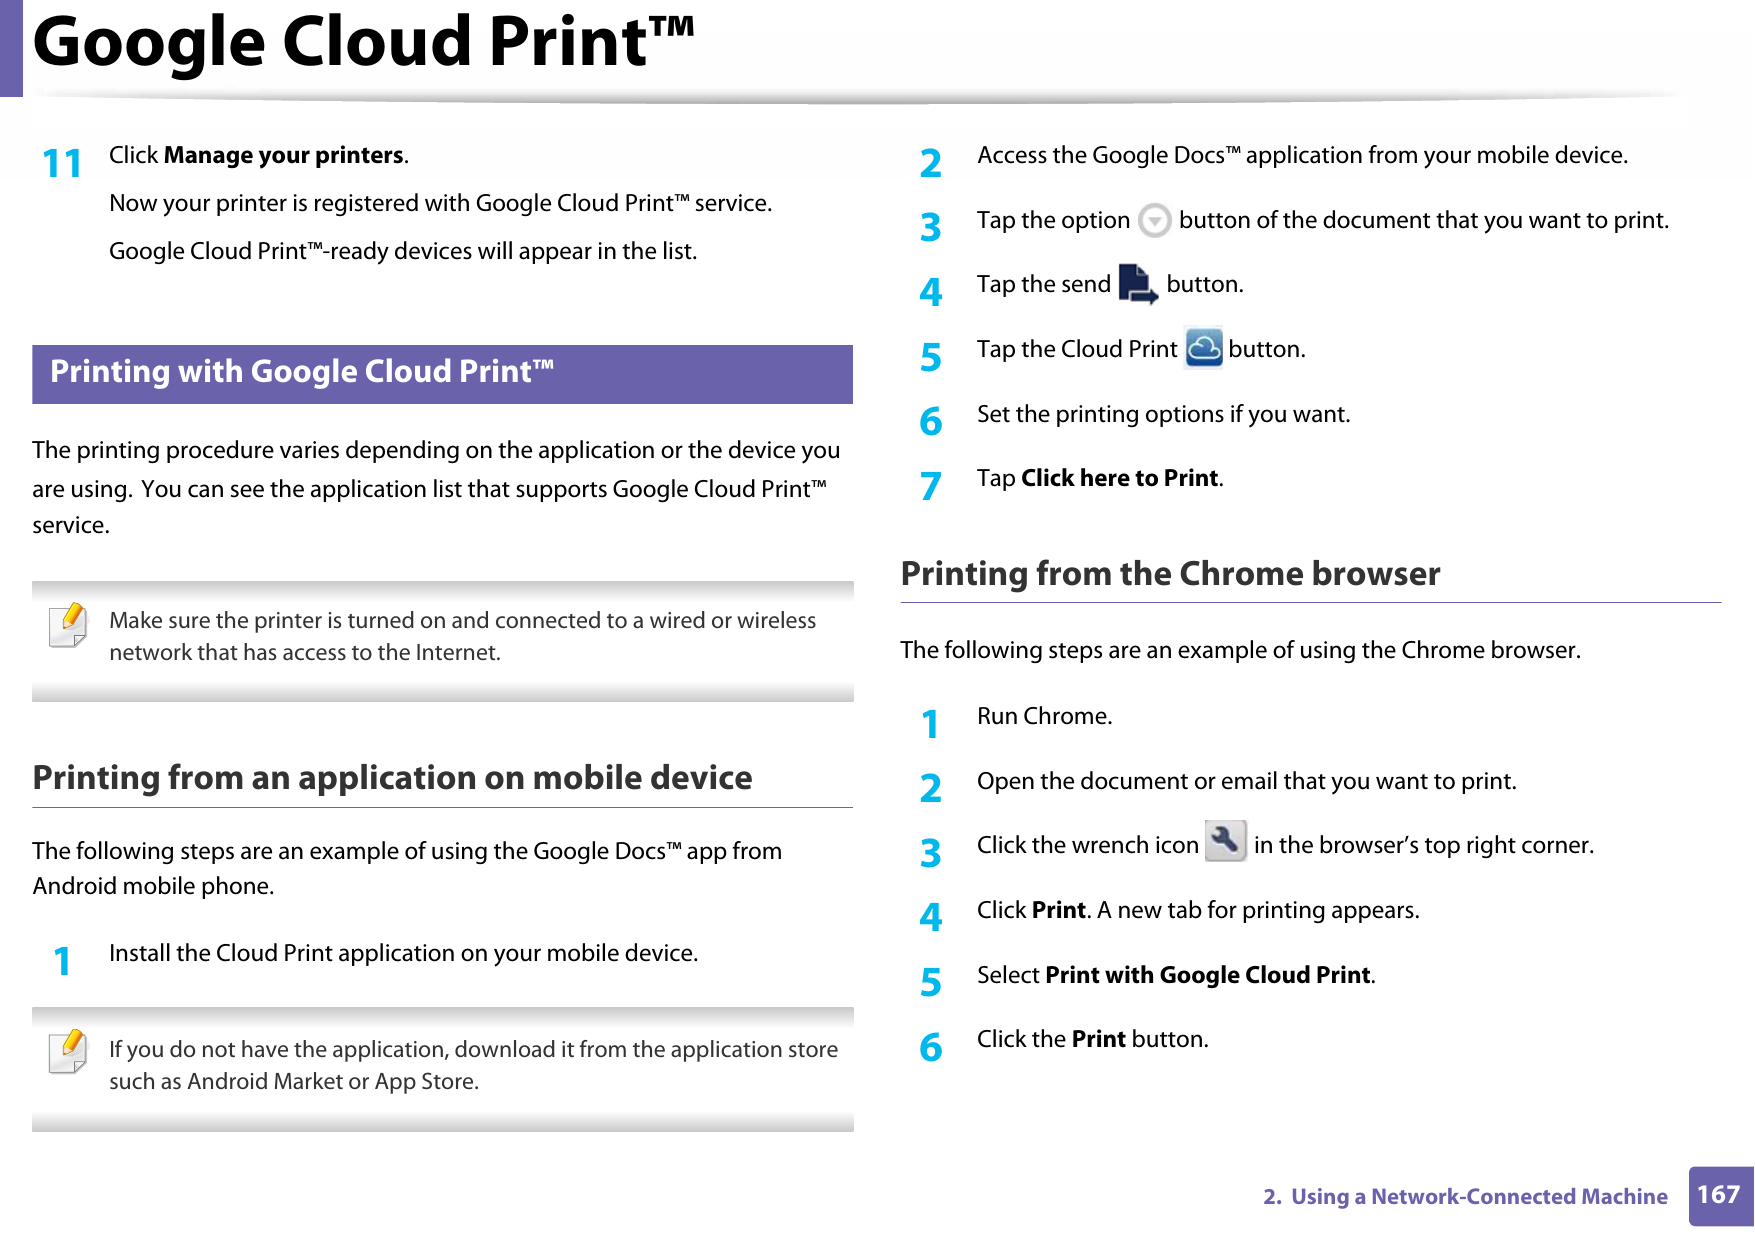 Google Cloud Print™1672.  Using a Network-Connected Machine11  Click Manage your printers.Now your printer is registered with Google Cloud Print™ service.Google Cloud Print™-ready devices will appear in the list.36 Printing with Google Cloud Print™The printing procedure varies depending on the application or the device you are using. You can see the application list that supports Google Cloud Print™ service. Make sure the printer is turned on and connected to a wired or wireless network that has access to the Internet. Printing from an application on mobile deviceThe following steps are an example of using the Google Docs™ app from Android mobile phone.1Install the Cloud Print application on your mobile device. If you do not have the application, download it from the application store such as Android Market or App Store. 2  Access the Google Docs™ application from your mobile device.3  Tap the option   button of the document that you want to print.4  Tap the send   button.5  Tap the Cloud Print   button.6  Set the printing options if you want.7  Tap Click here to Print.Printing from the Chrome browserThe following steps are an example of using the Chrome browser.1Run Chrome.2  Open the document or email that you want to print.3  Click the wrench icon   in the browser’s top right corner.4  Click Print. A new tab for printing appears.5  Select Print with Google Cloud Print.6  Click the Print button.